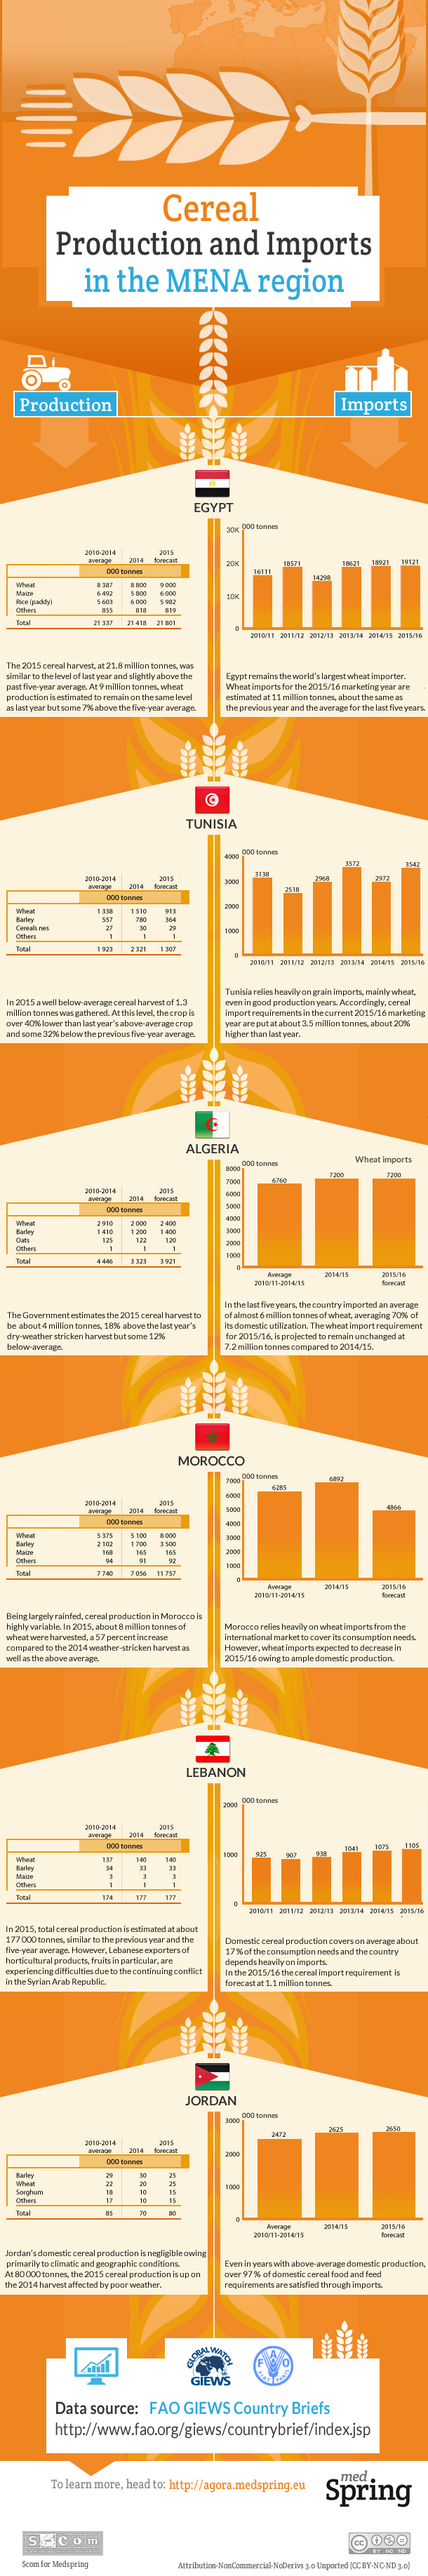 Cereal production and imports in the MENA region - infographic